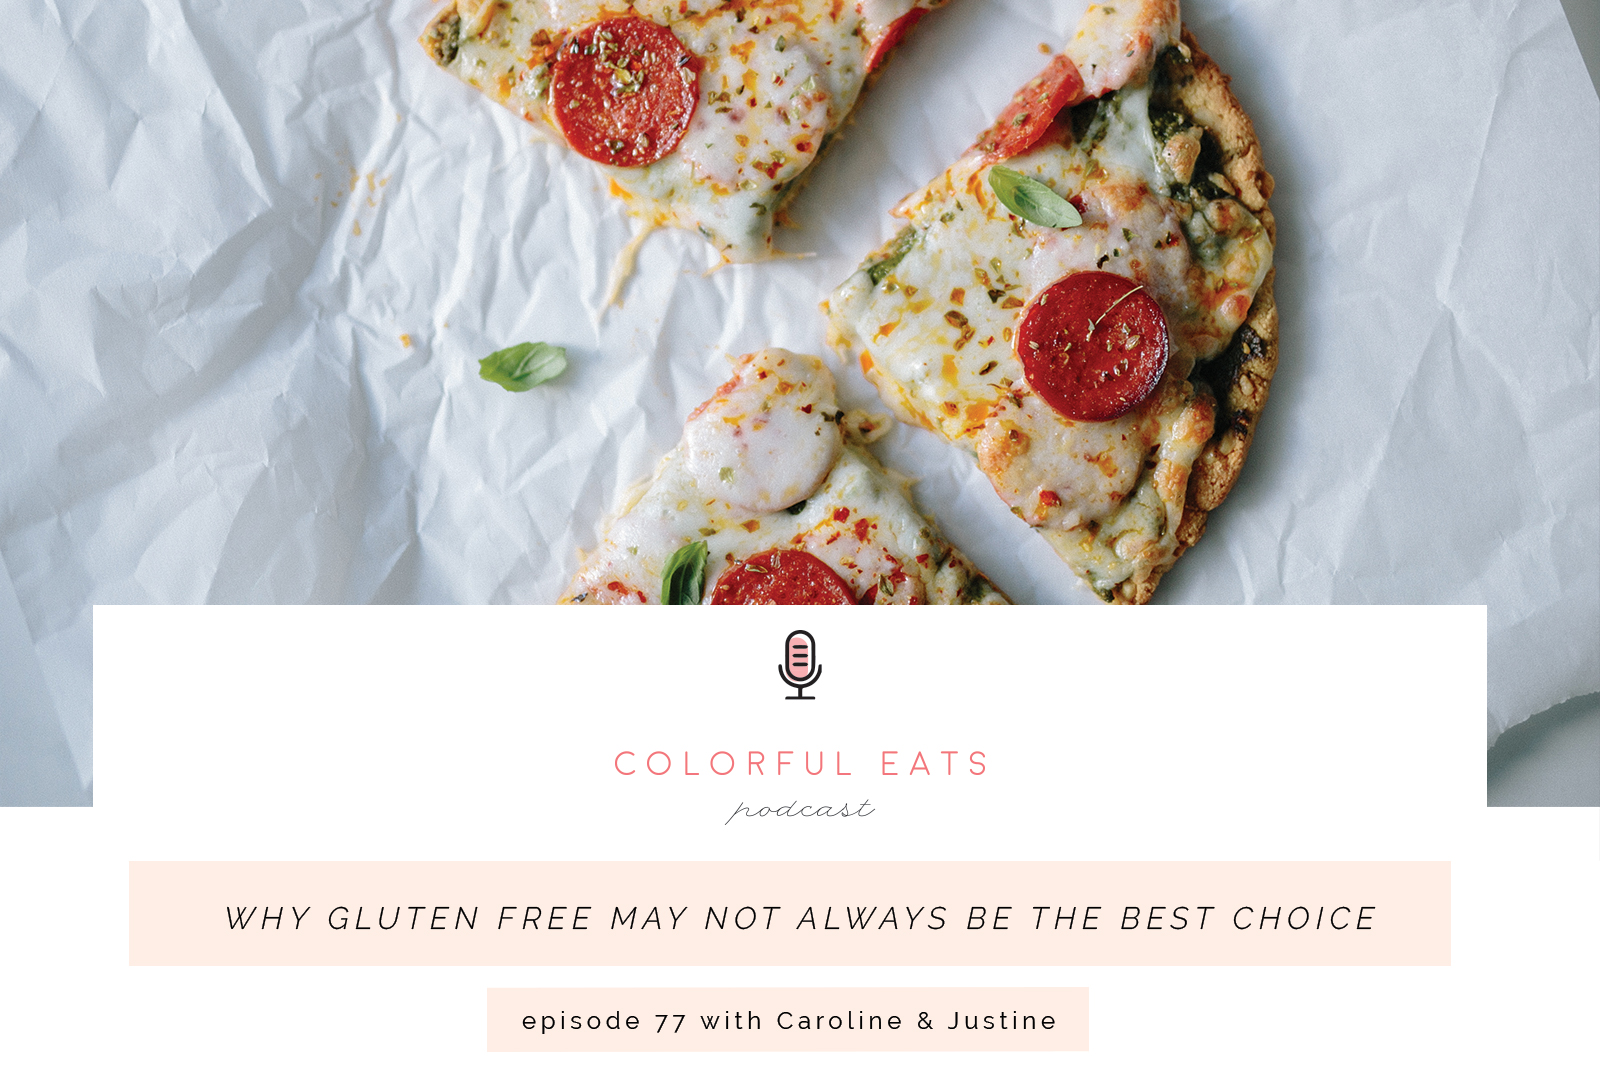 Episode 77: Why Gluten Free May Not Always Be the Best Choice